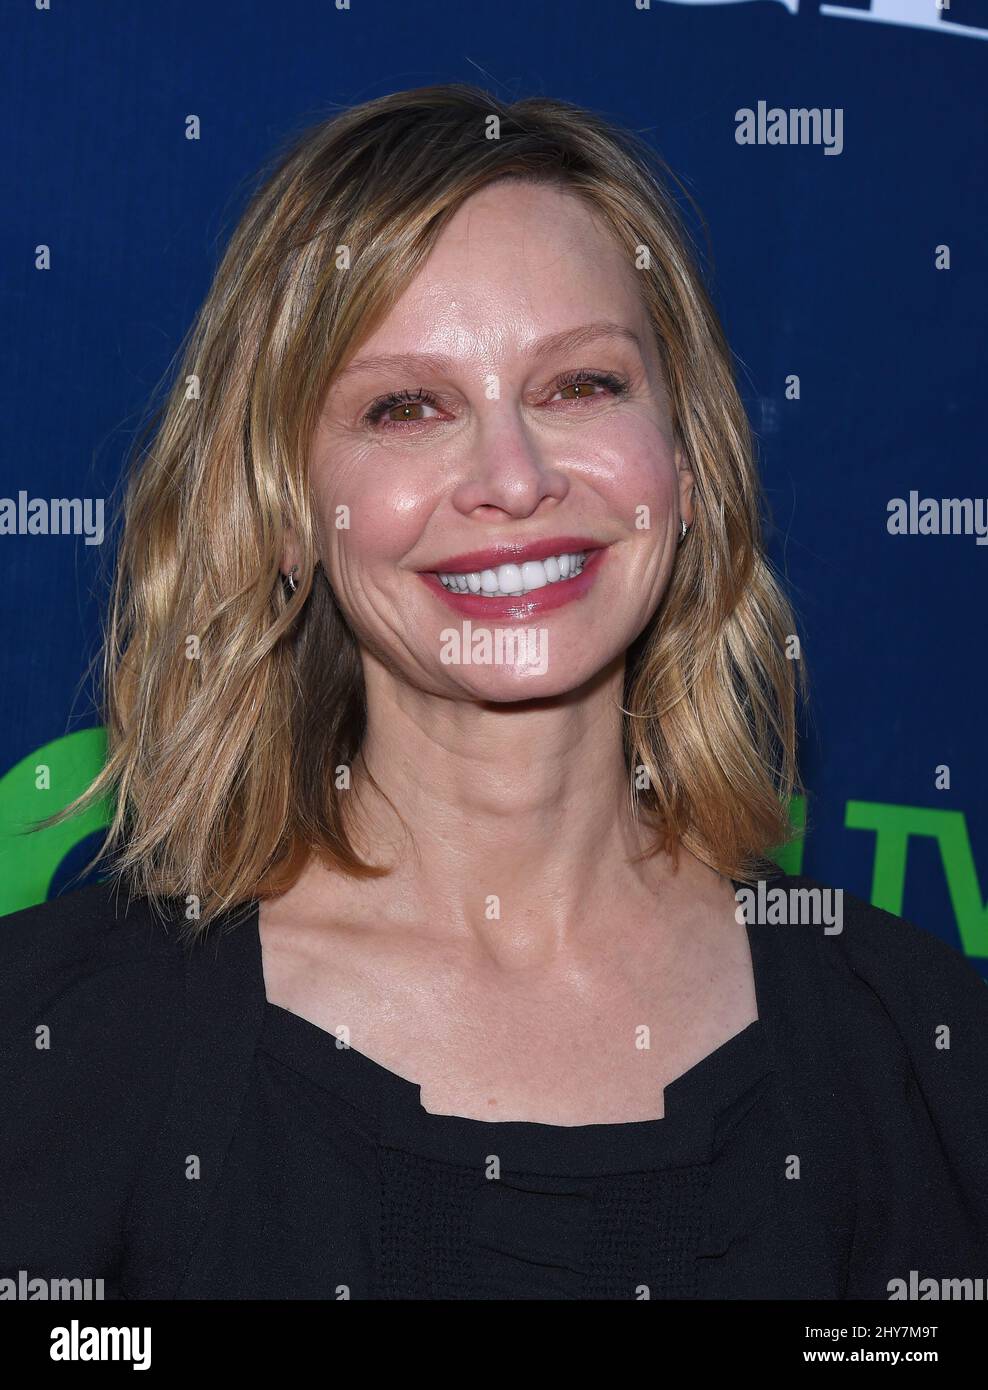 Calista Flockhart attending the CBS, The CW and Showtime Summer TCA press tour. Stock Photo